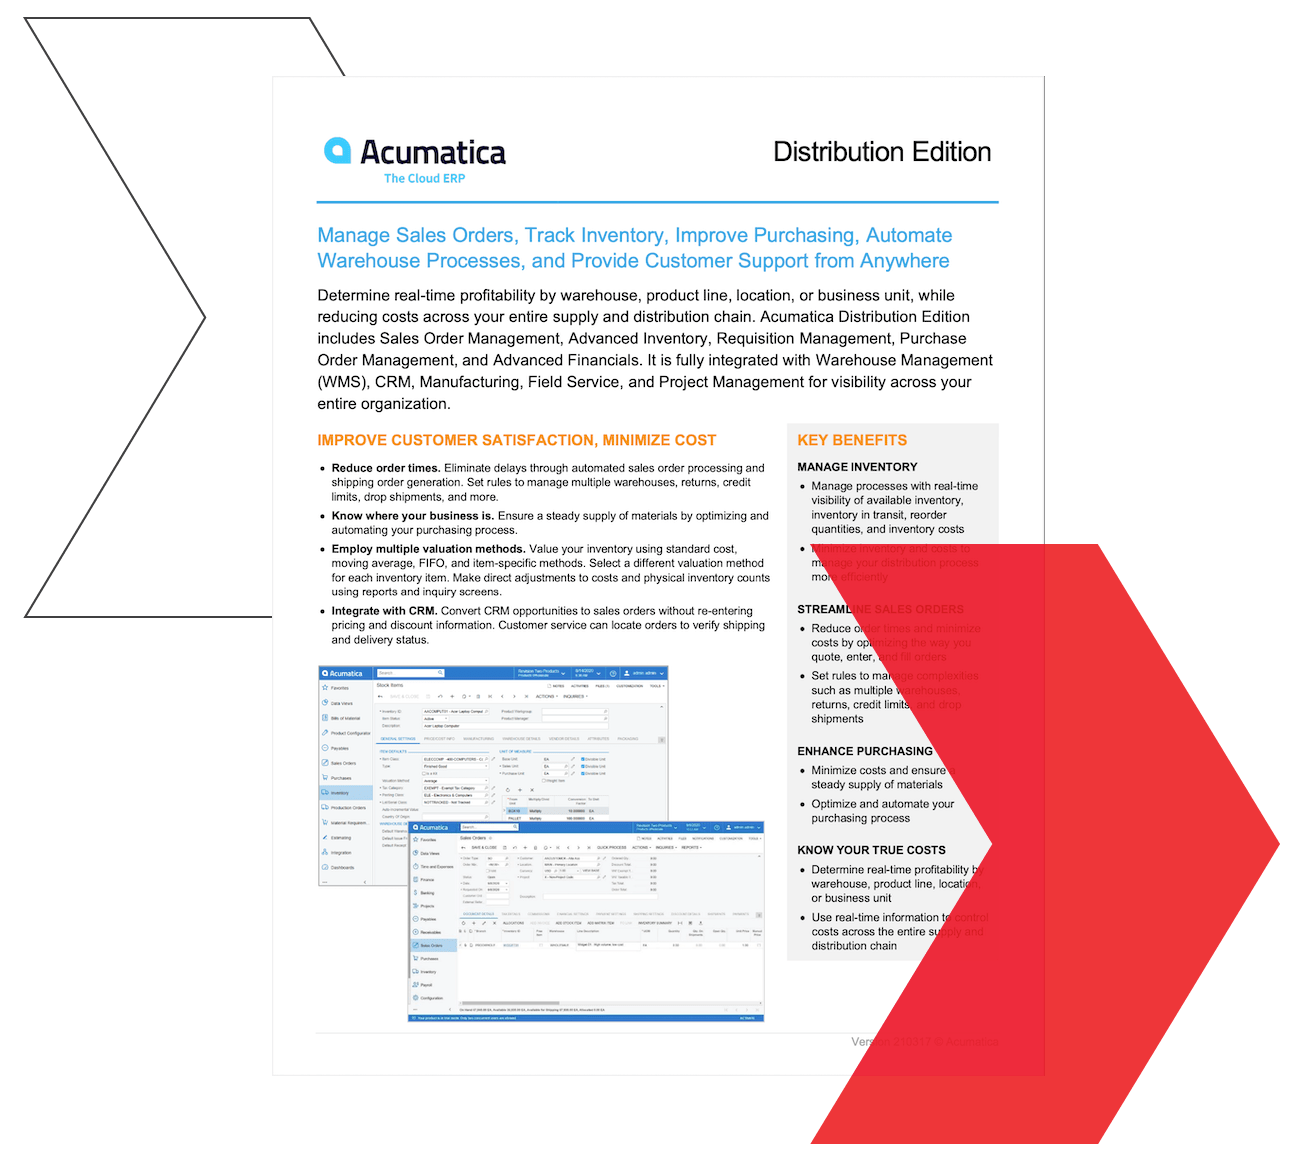 See information sheet on <span>Acumatica’s ERP software for distributors</span>